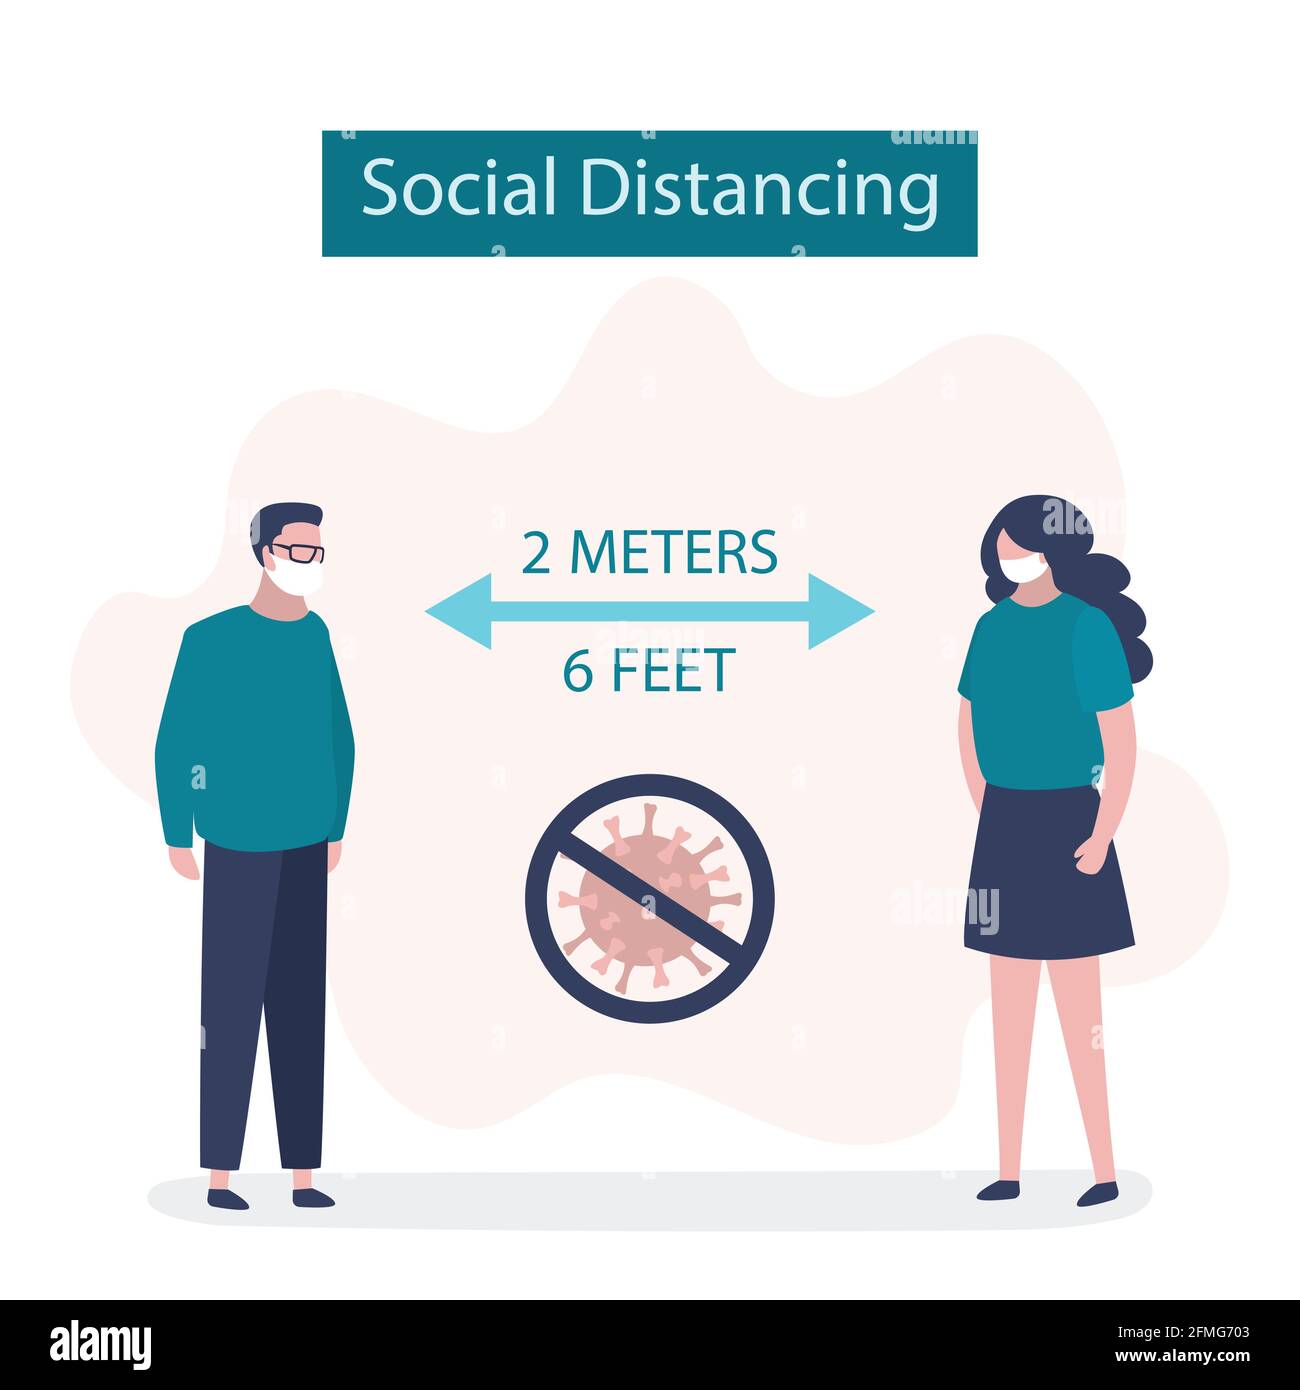 Social Distancing, two people keeping distance for infection risk and disease. 2 meters or 6 feet distance between humans.Covid-19 prevention banner. Stock Vector